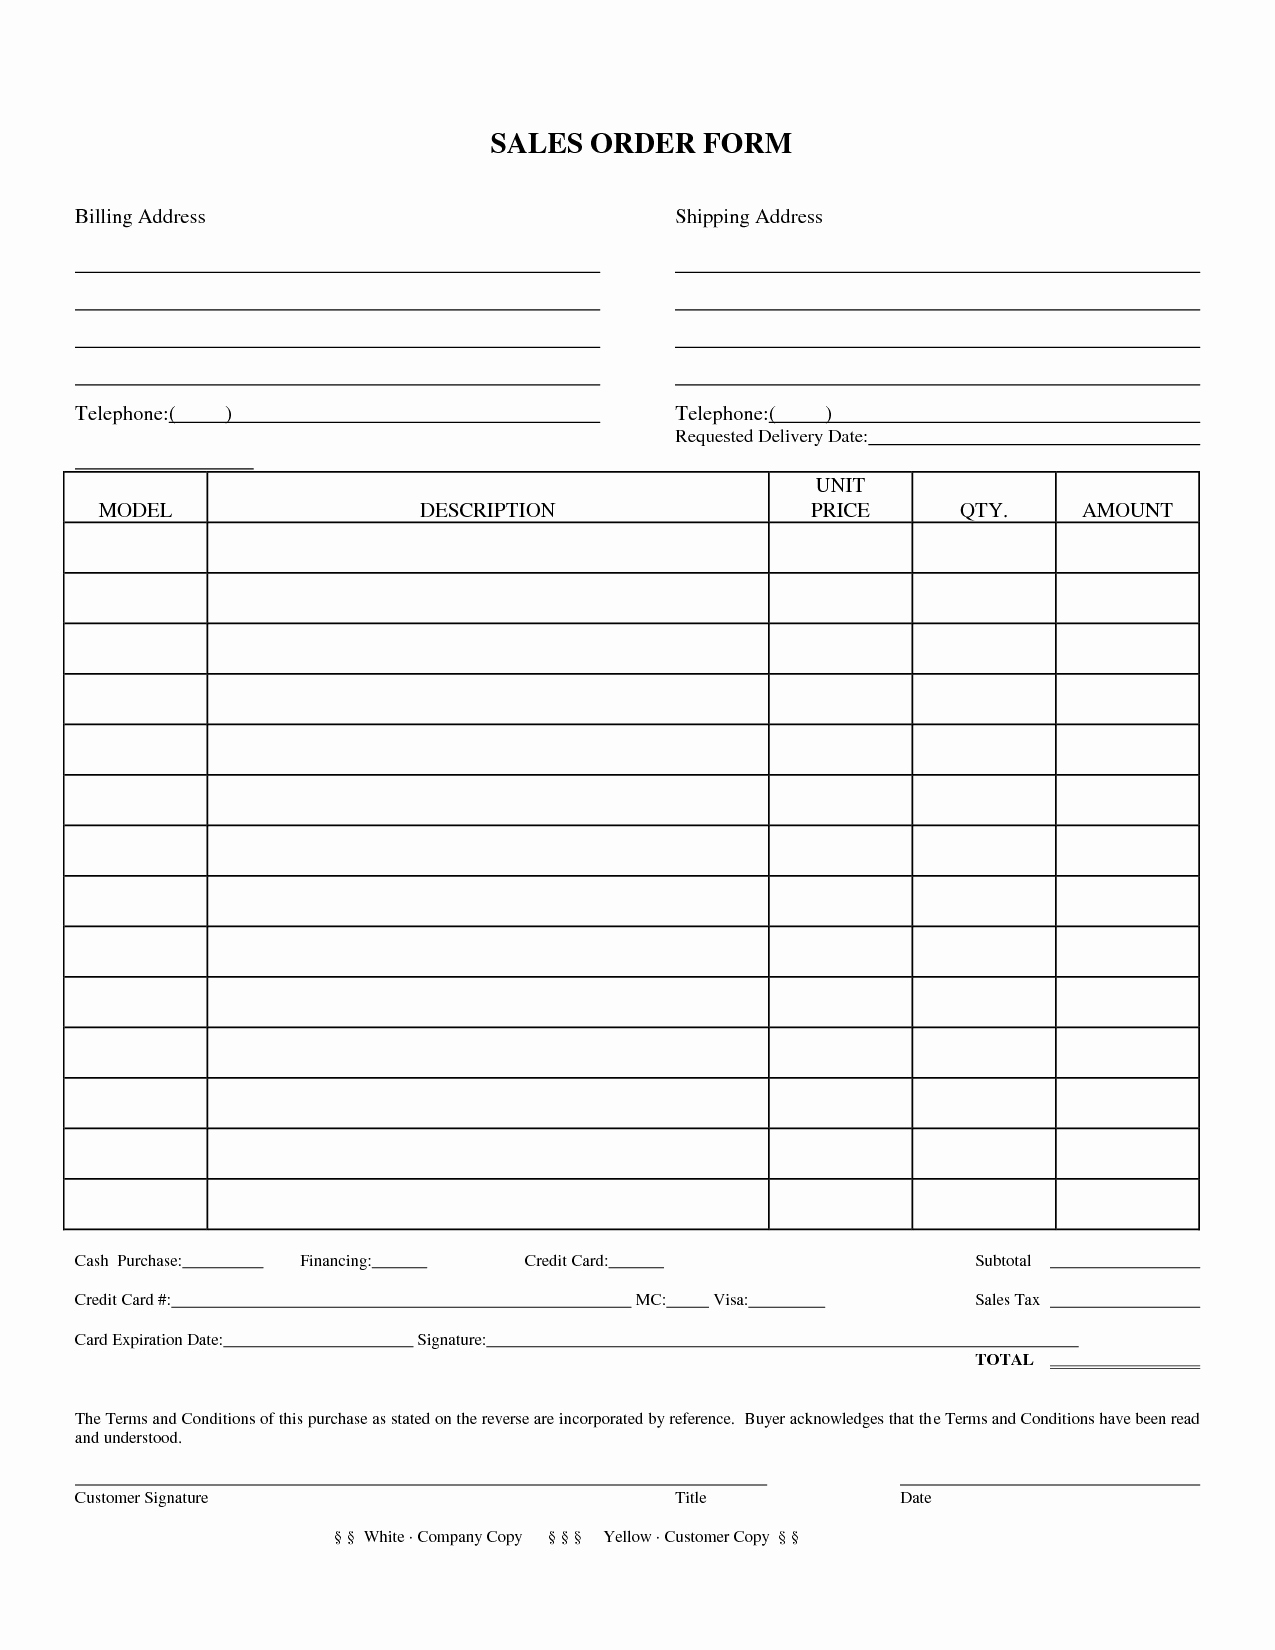 Sales order form Templates Free Inspirational Sales forms Sales order form Doc Doc